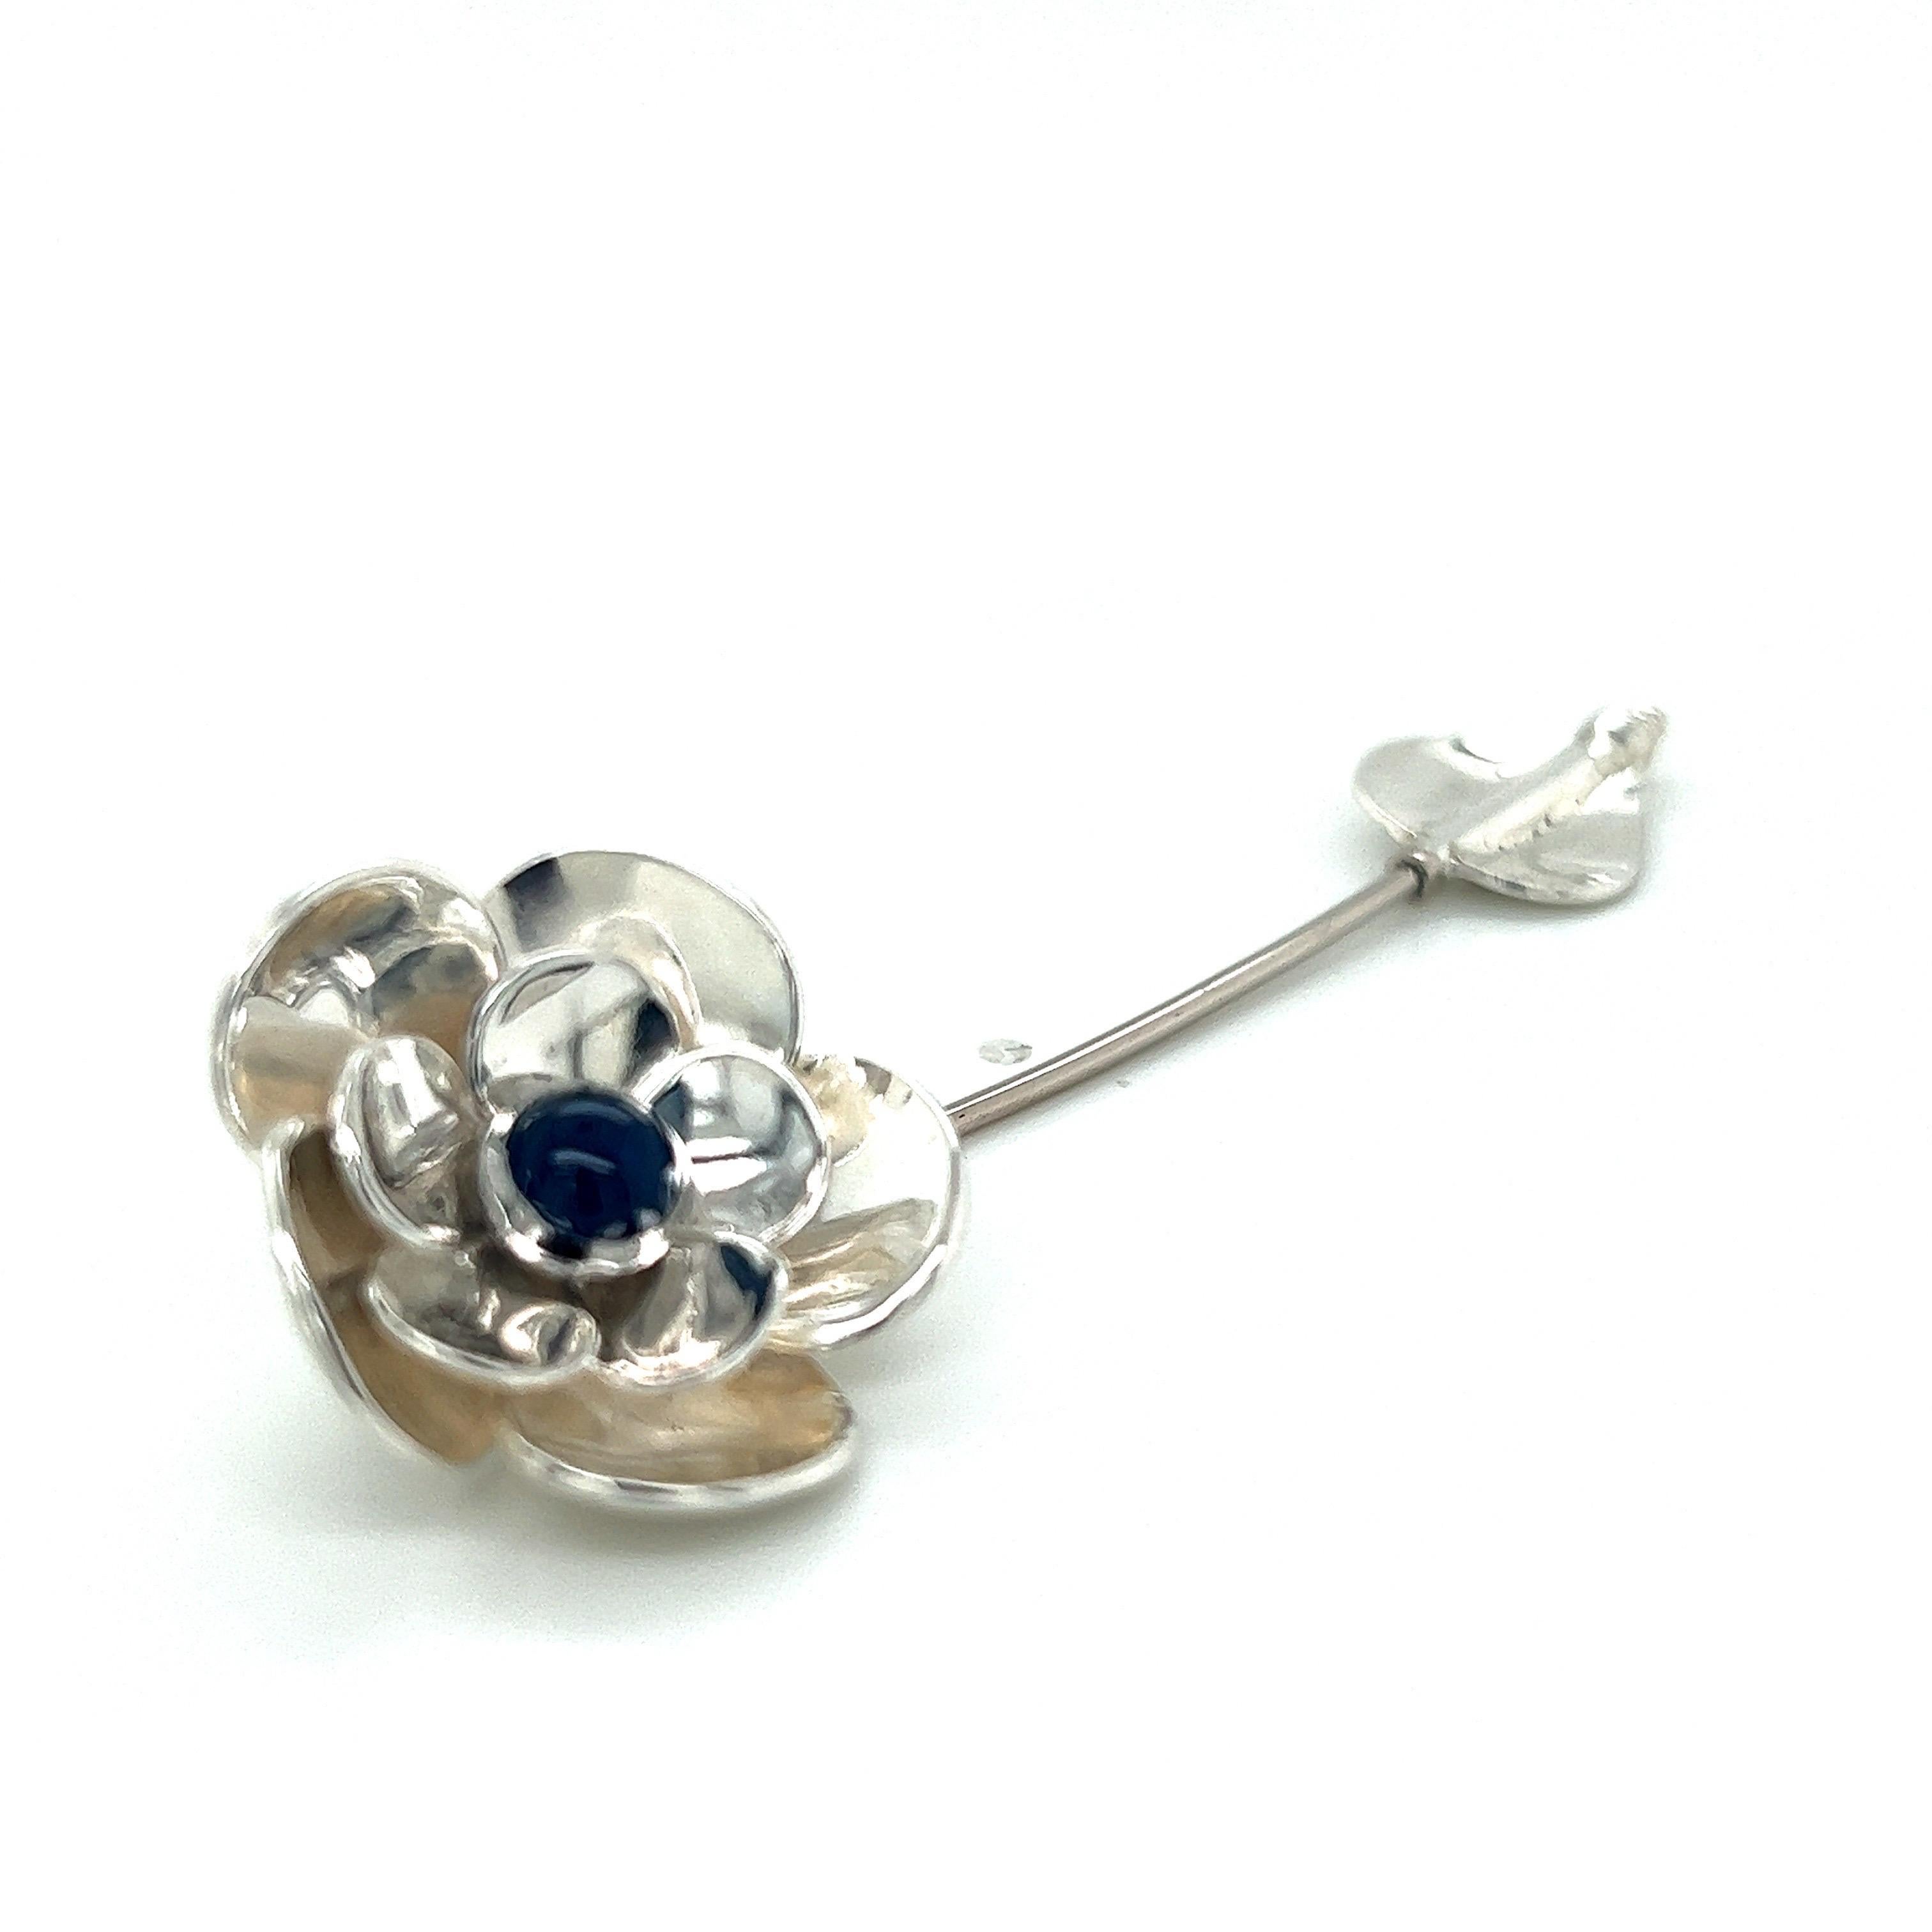 Sterling Silver, Platinum, And 14k White Gold Flower Stick Lapel Pin With Cabochon Sapphire With Screw-On Bottom Clutch In The Shape Of a Leef